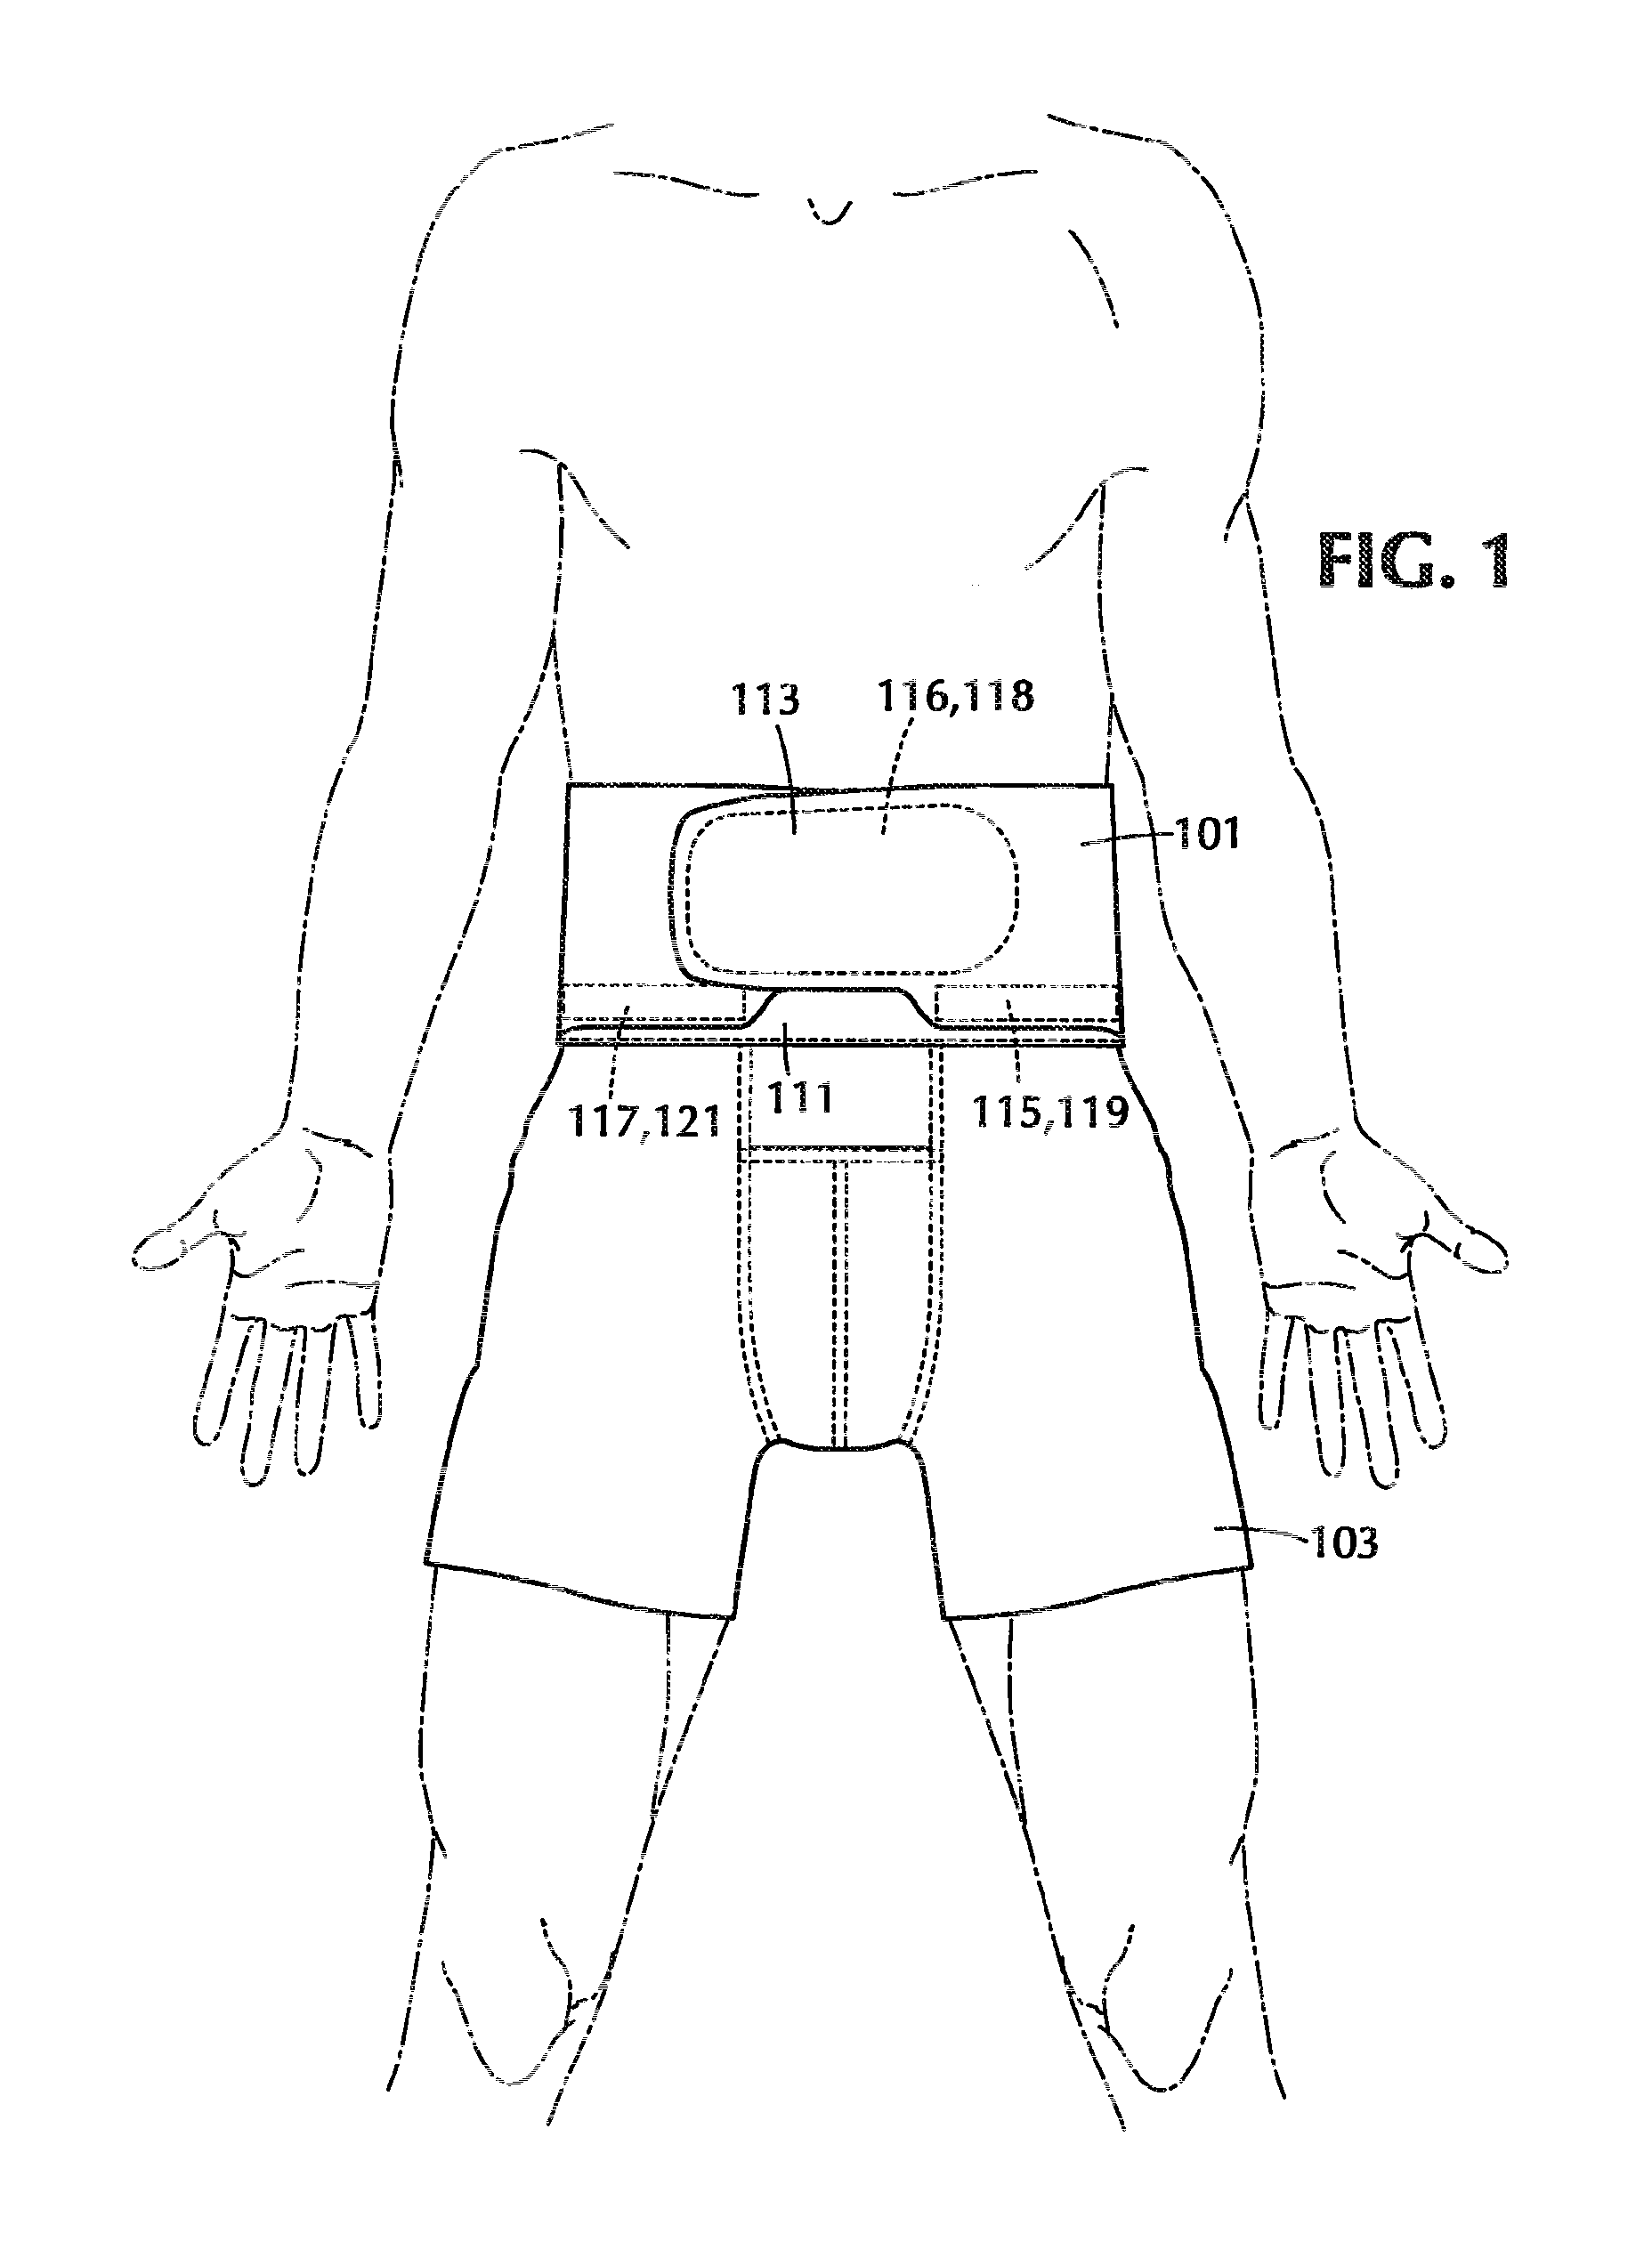 Back support garment apparatus